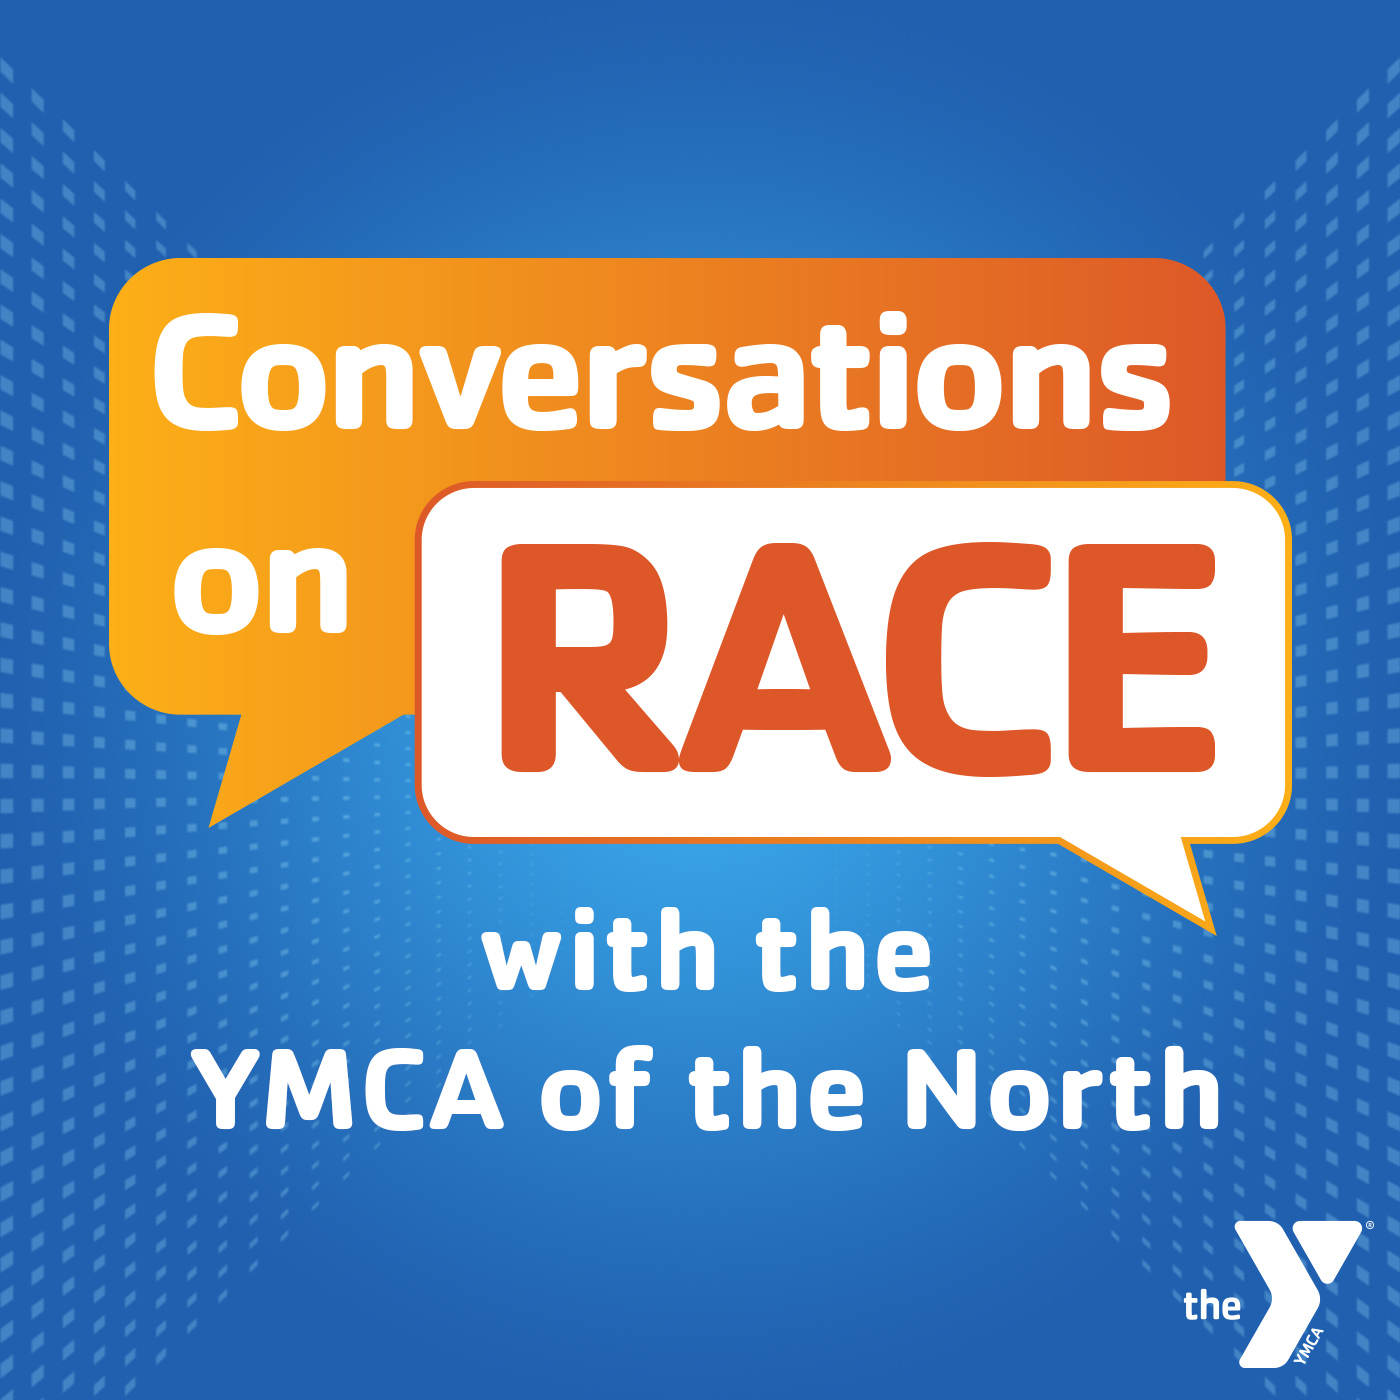 The YMCA of the North interviews former head coach Tony Dungy and learns about his upbringing, family views, and more.